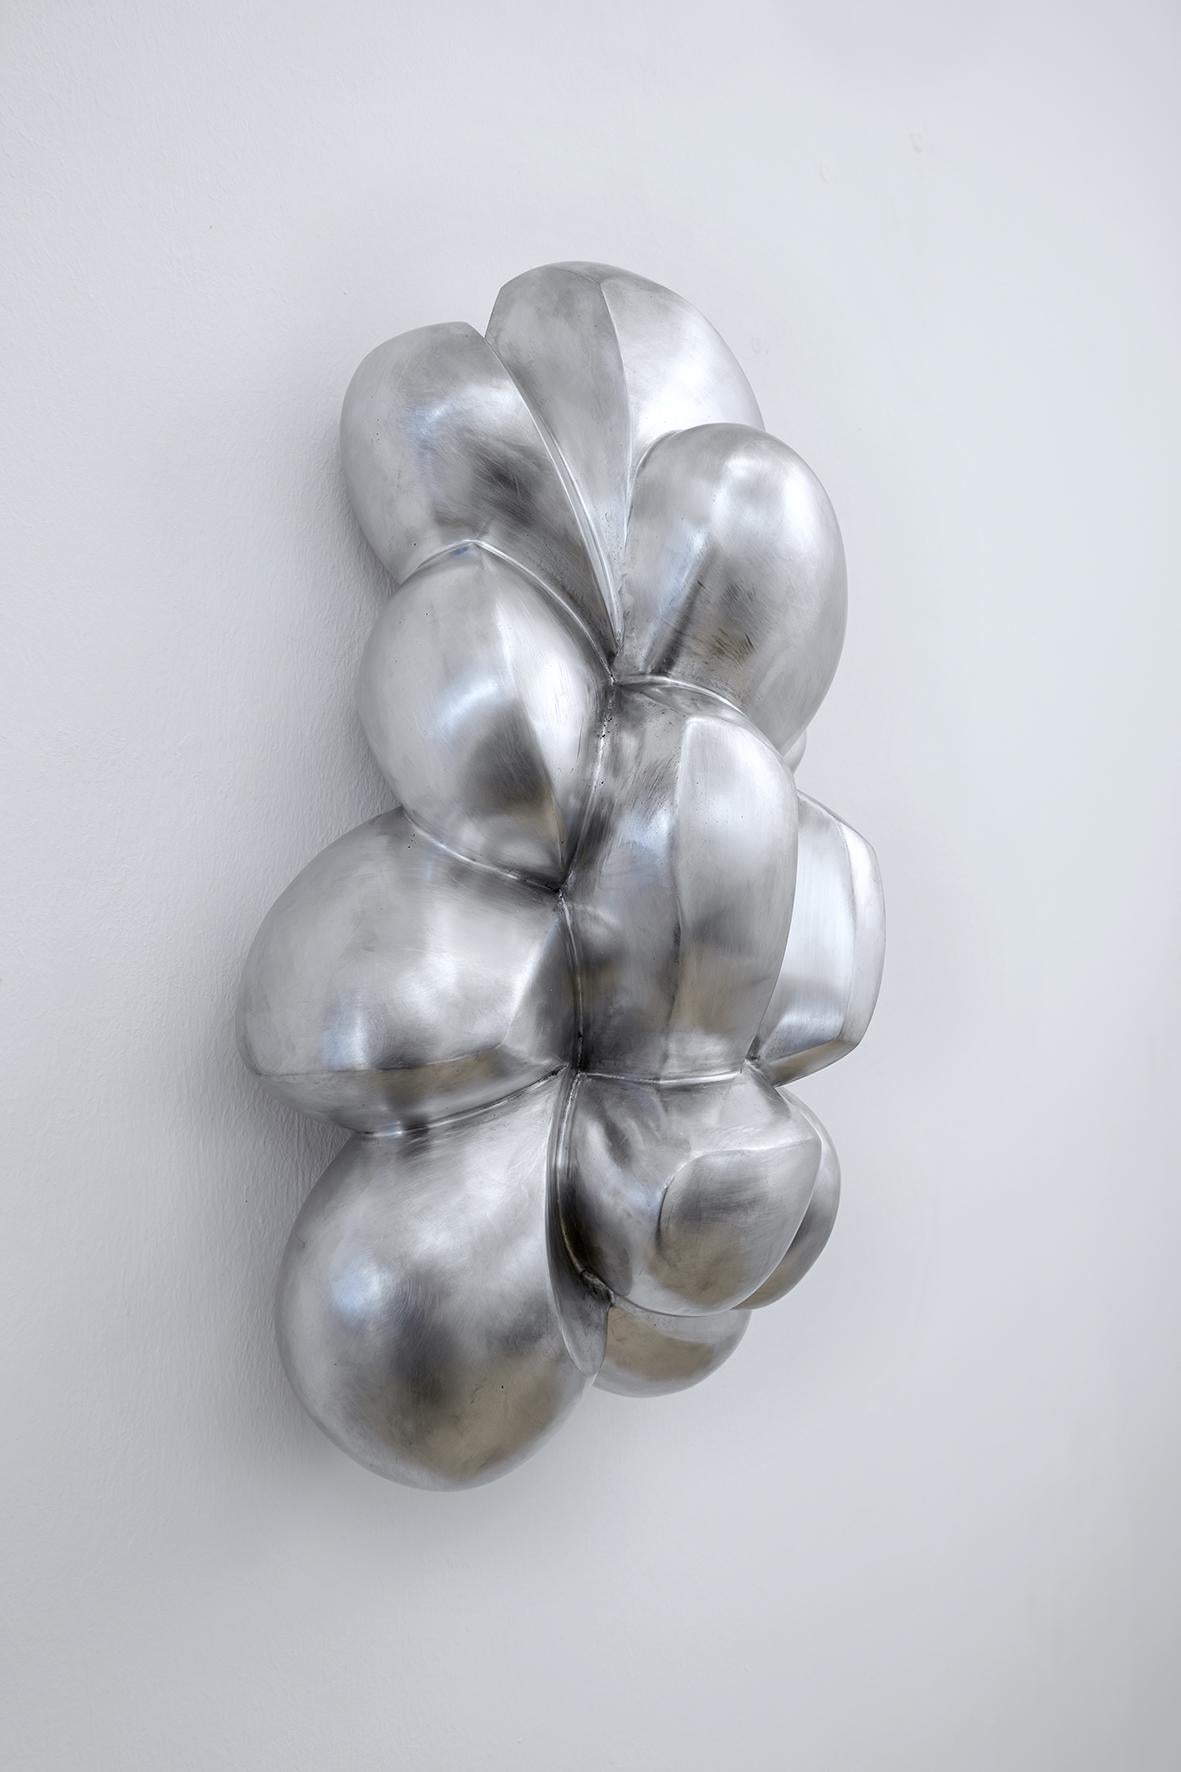 Aluminum Wall Sculpture 'Wandobjekt 02/21' by Carola Eggeling
Abstract sculpture with beautiful curved lines.

German aluminum sculpture
Aluminum brushed
Numbered and signed artwork
Limited edition of 3
Measures: H. 64 x 40 x 20 cm
Lead time: 8